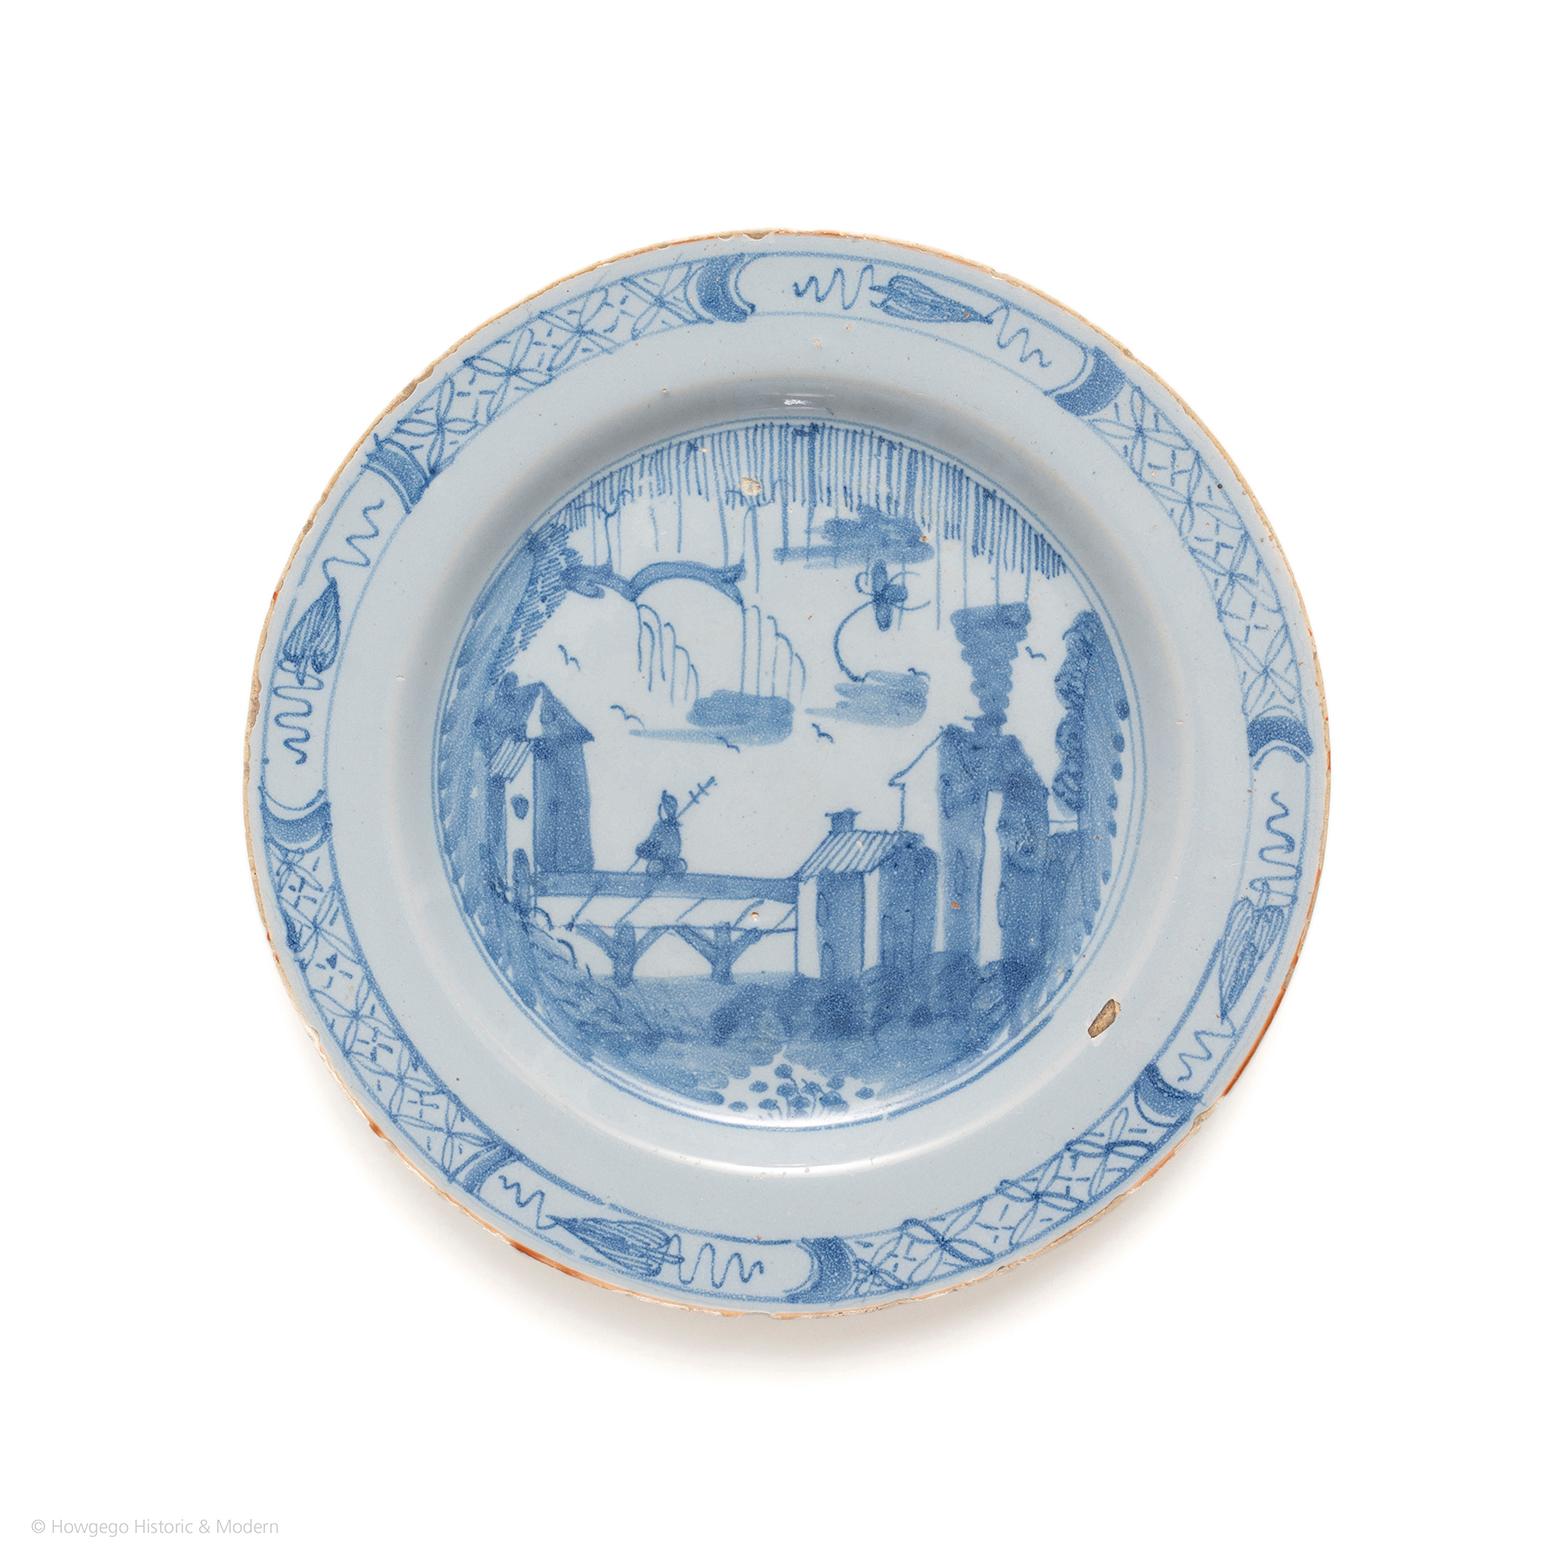 Unusual decoration blending European and Chinoiserie styles. 

Decorated with a chinoiserie scene of a soldier crossing a bridge with European houses on either side with Chinese plants and motifs. The rim decorated with a band of trellis and four